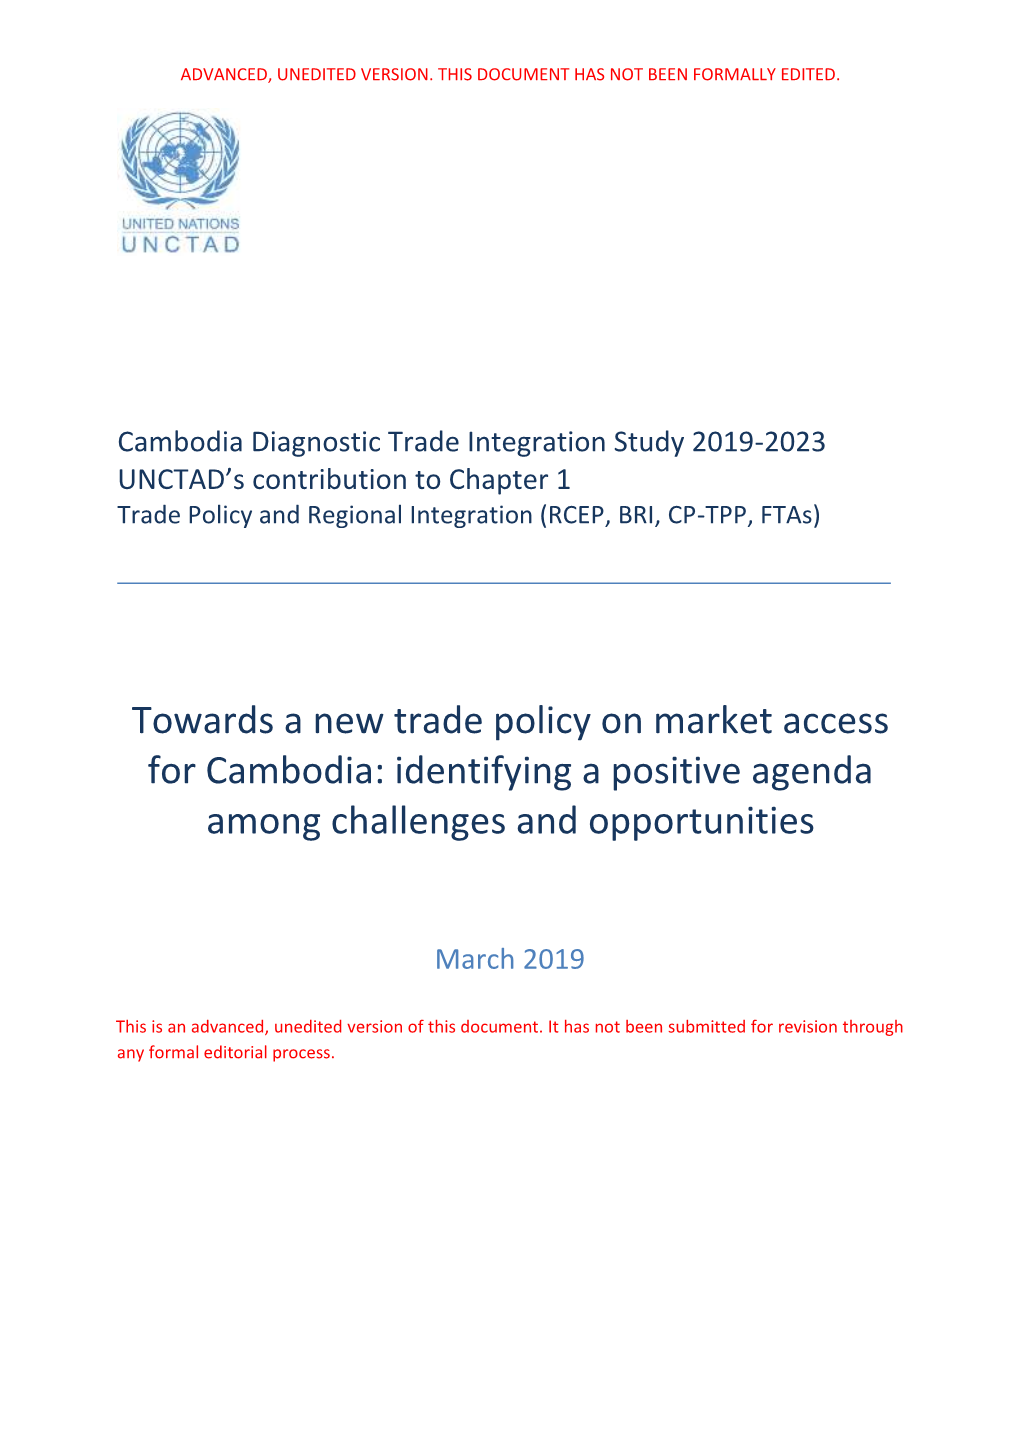 Towards a New Trade Policy on Market Access for Cambodia: Identifying a Positive Agenda Among Challenges and Opportunities